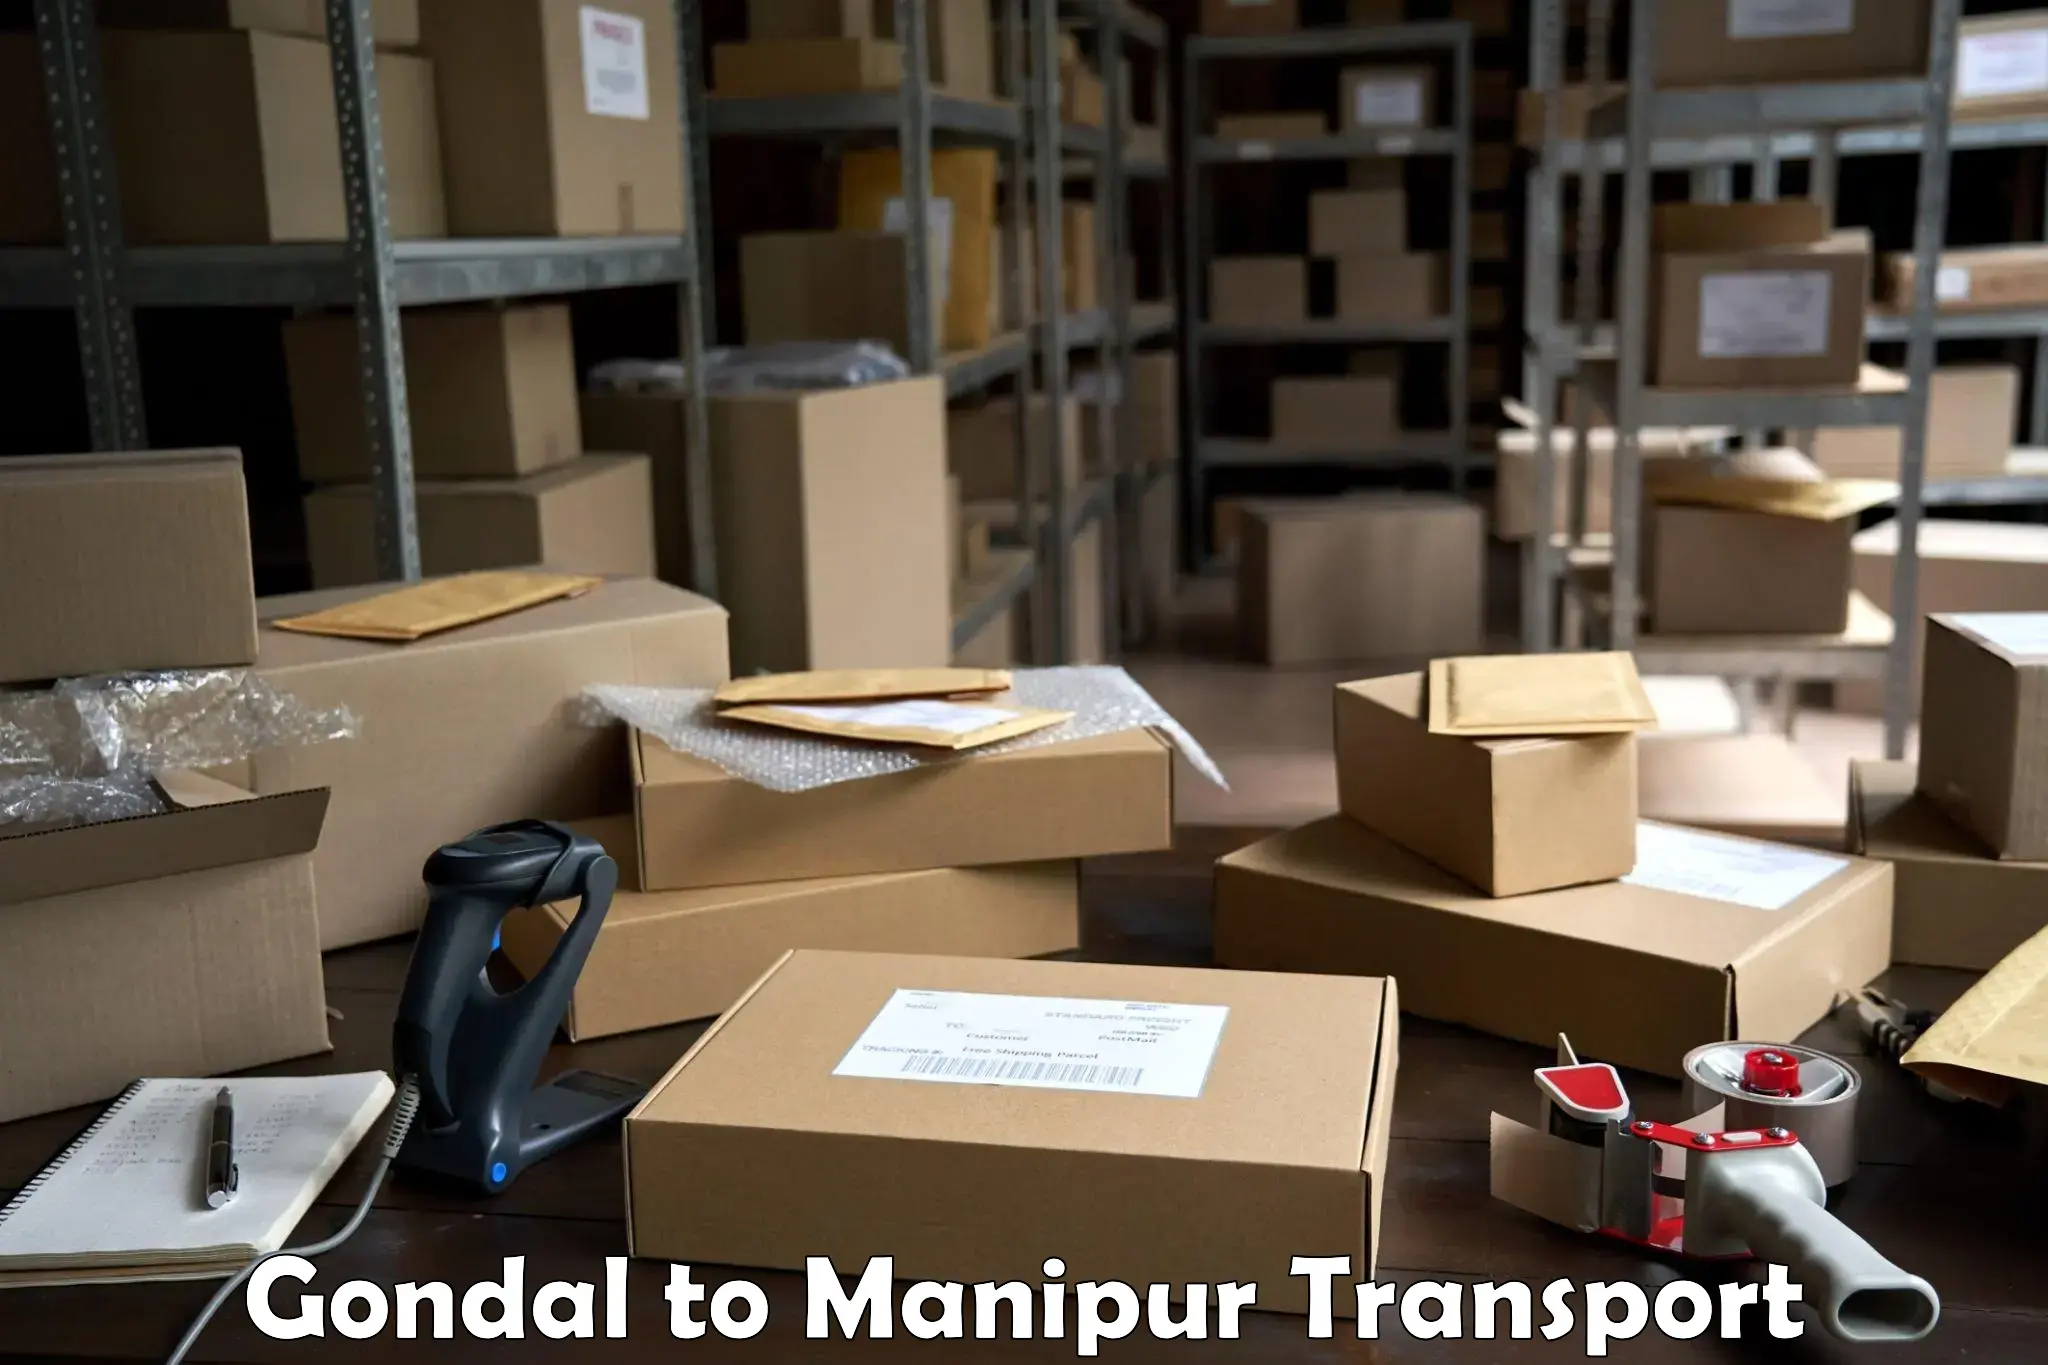 Lorry transport service Gondal to Manipur